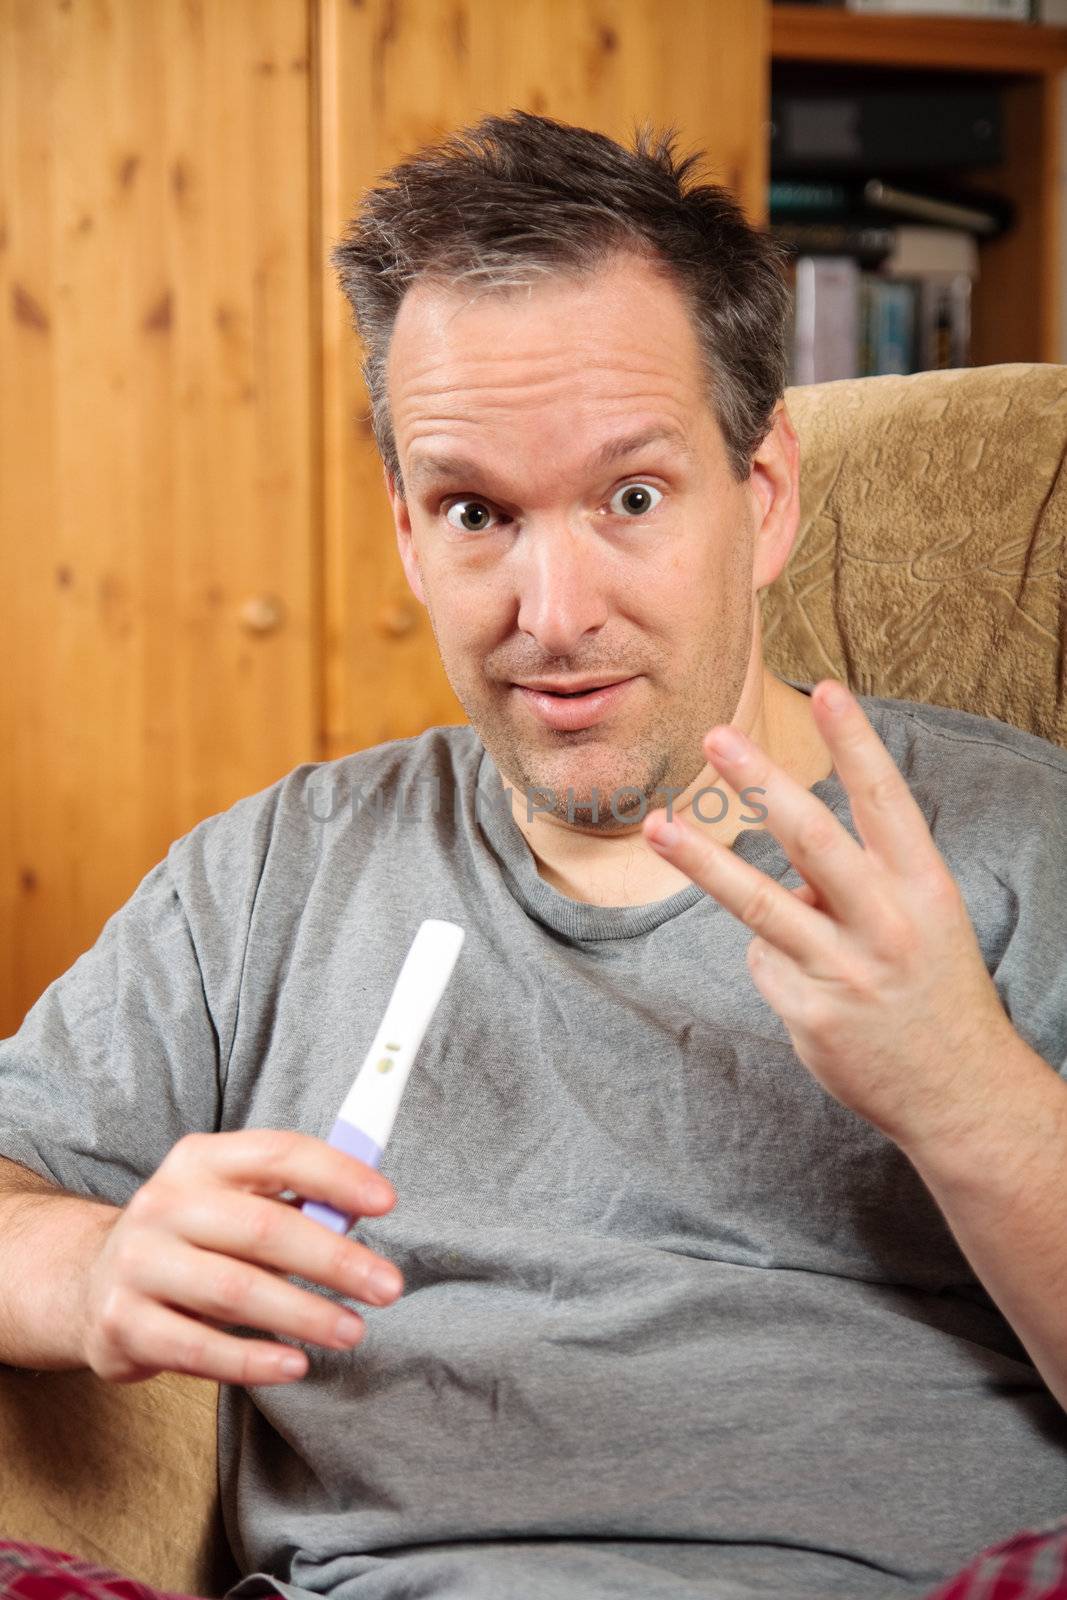 Man holding a pregnancy test by Talanis